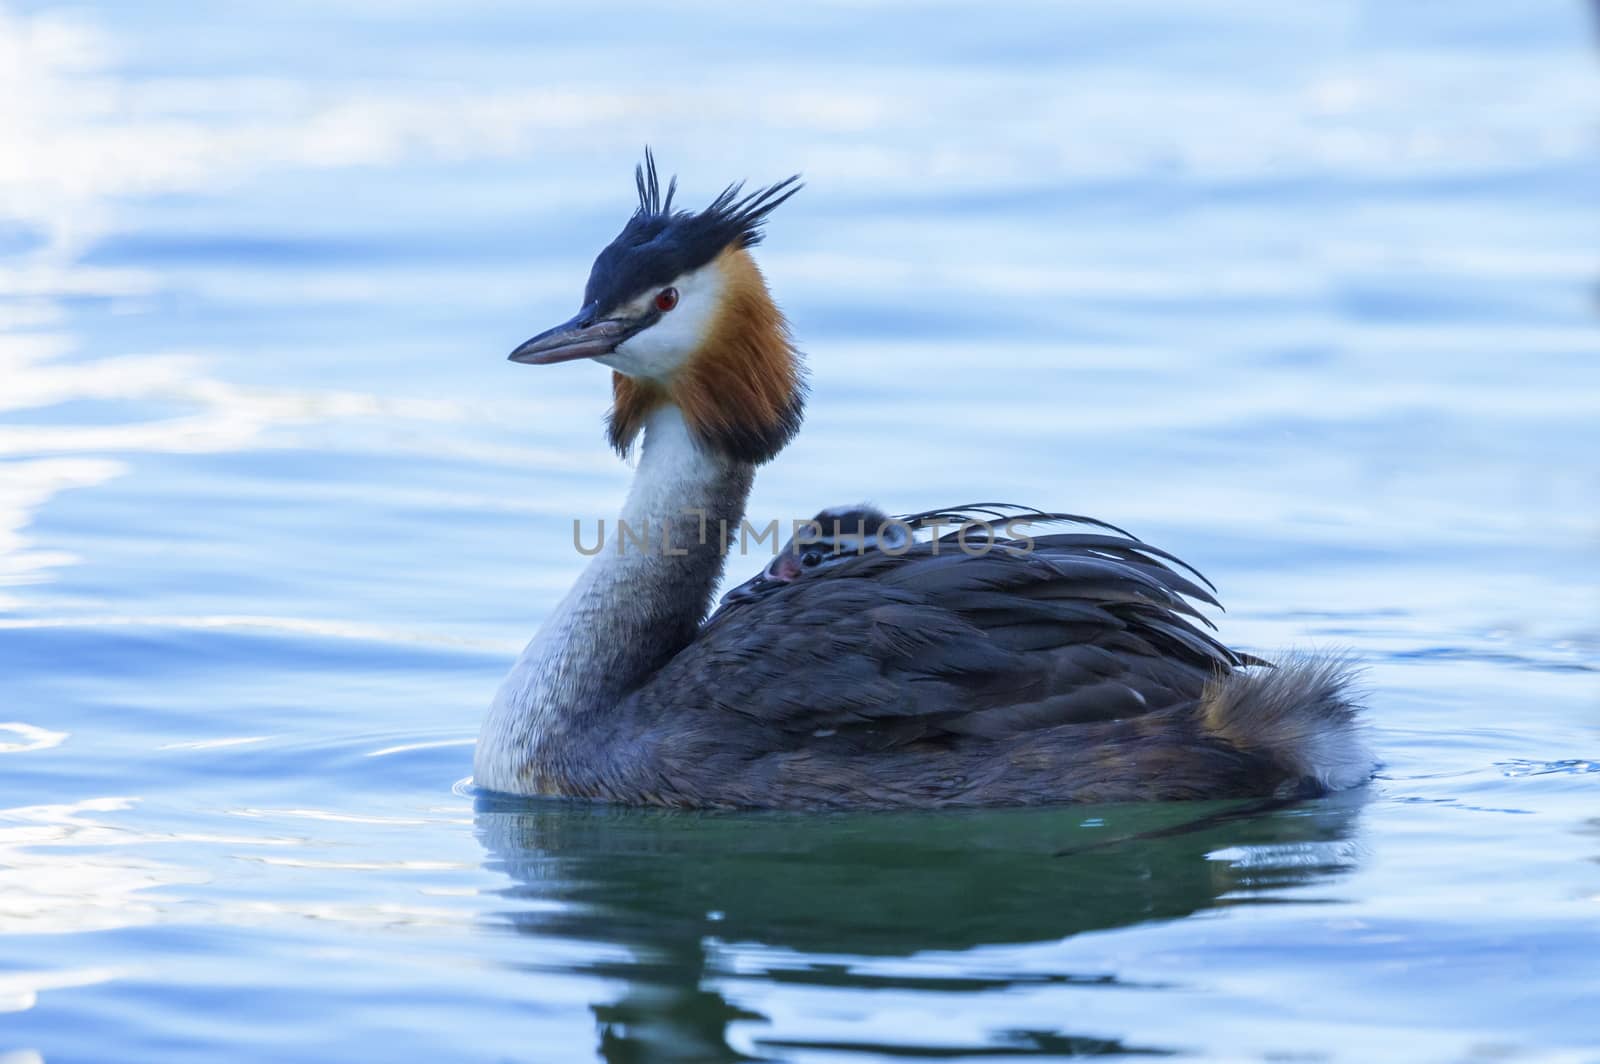 Crested grebe, podiceps cristatus, duck and baby by Elenaphotos21